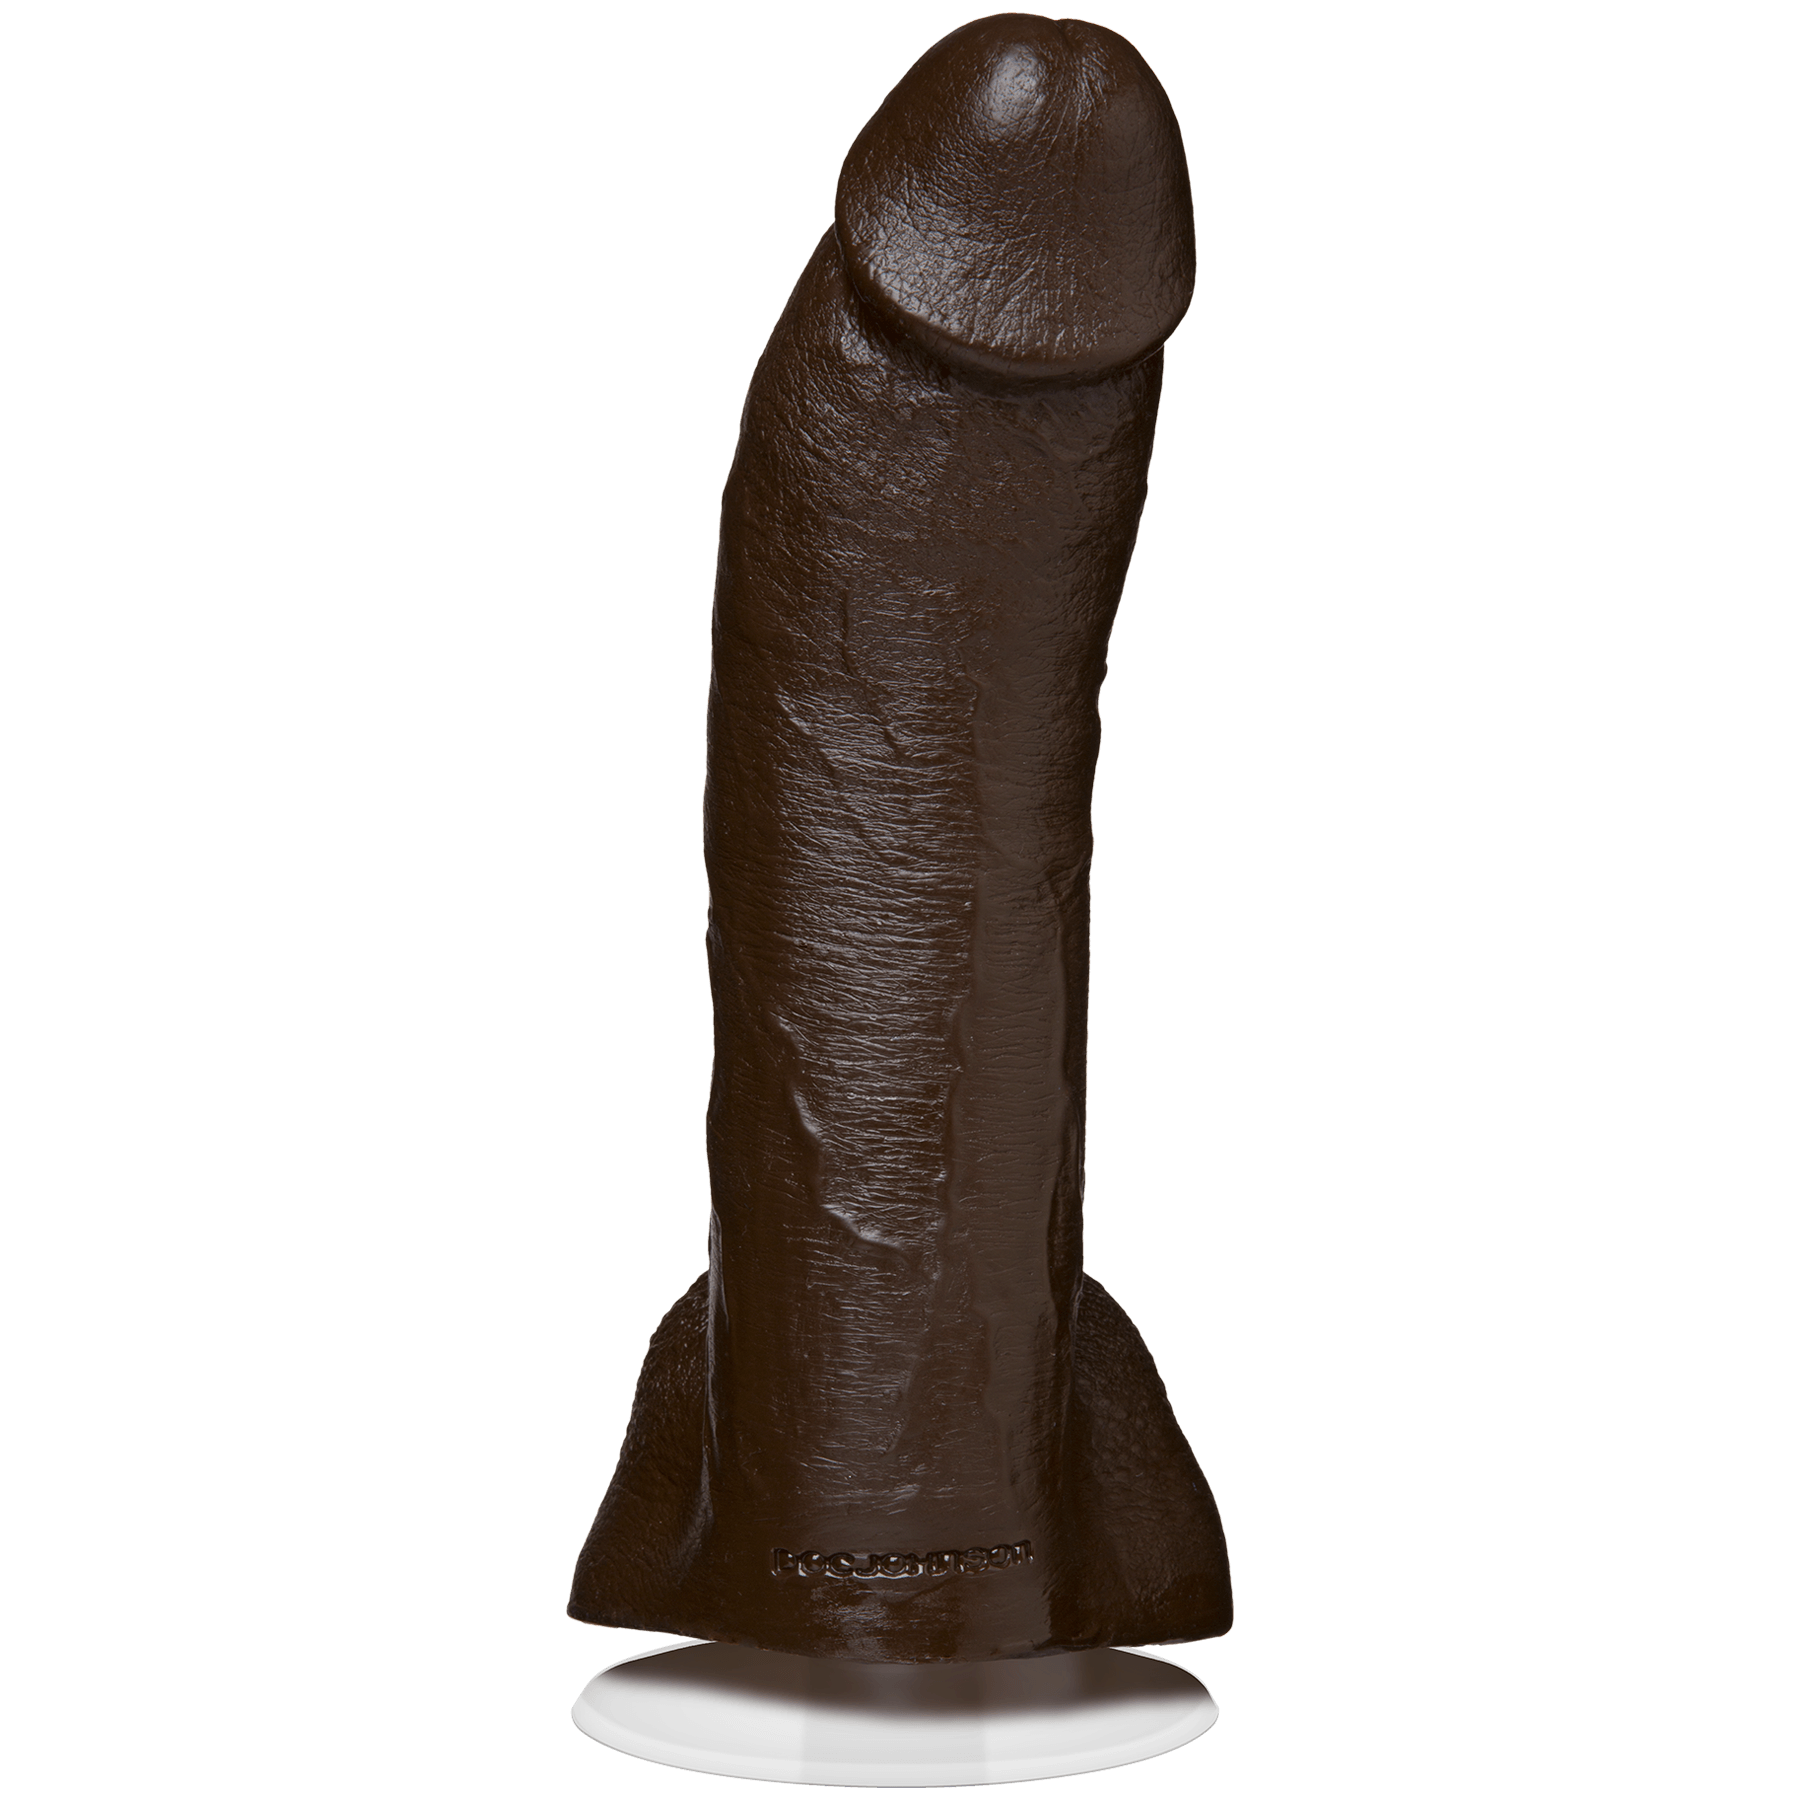 Doc Johnson Mr. Marcus Dildo - Buy At Luxury Toy X - Free 3-Day Shipping